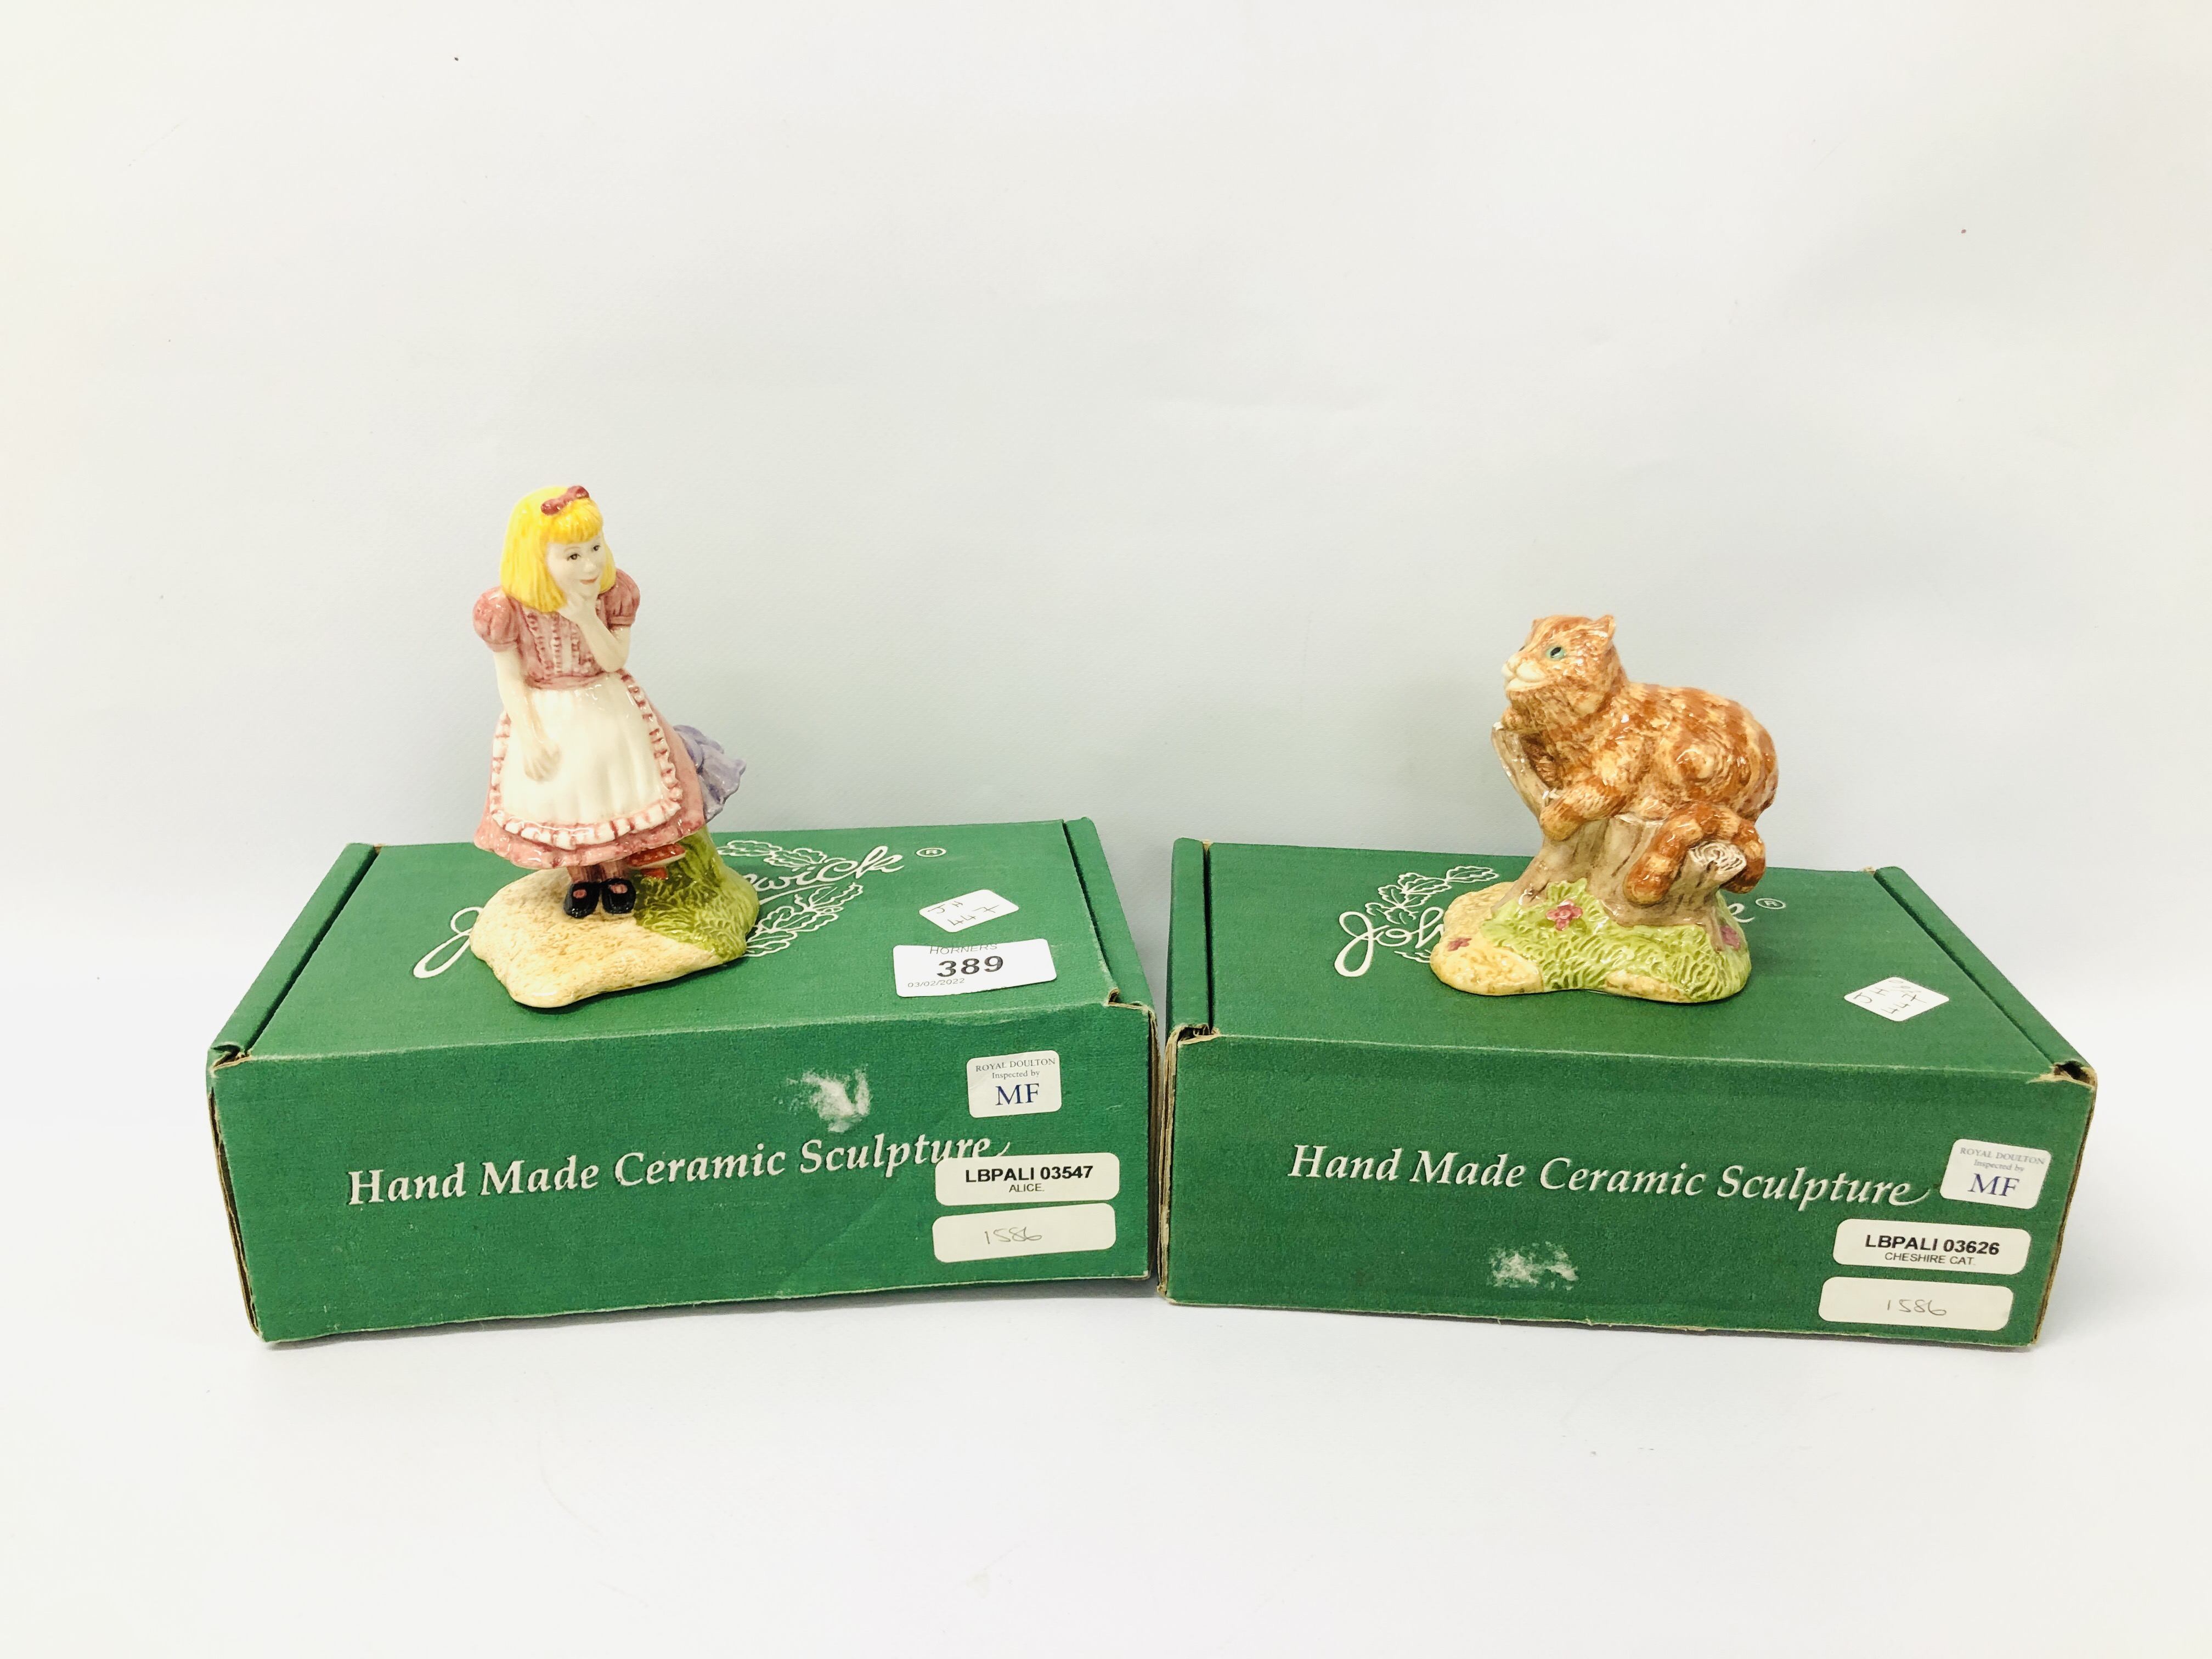 2 X BESWICK LIMITED EDITION ORNAMENTS COMPRISING "ALICE" LC2 1586 / 2500 & "THE CHESHIRE CAT" LC3